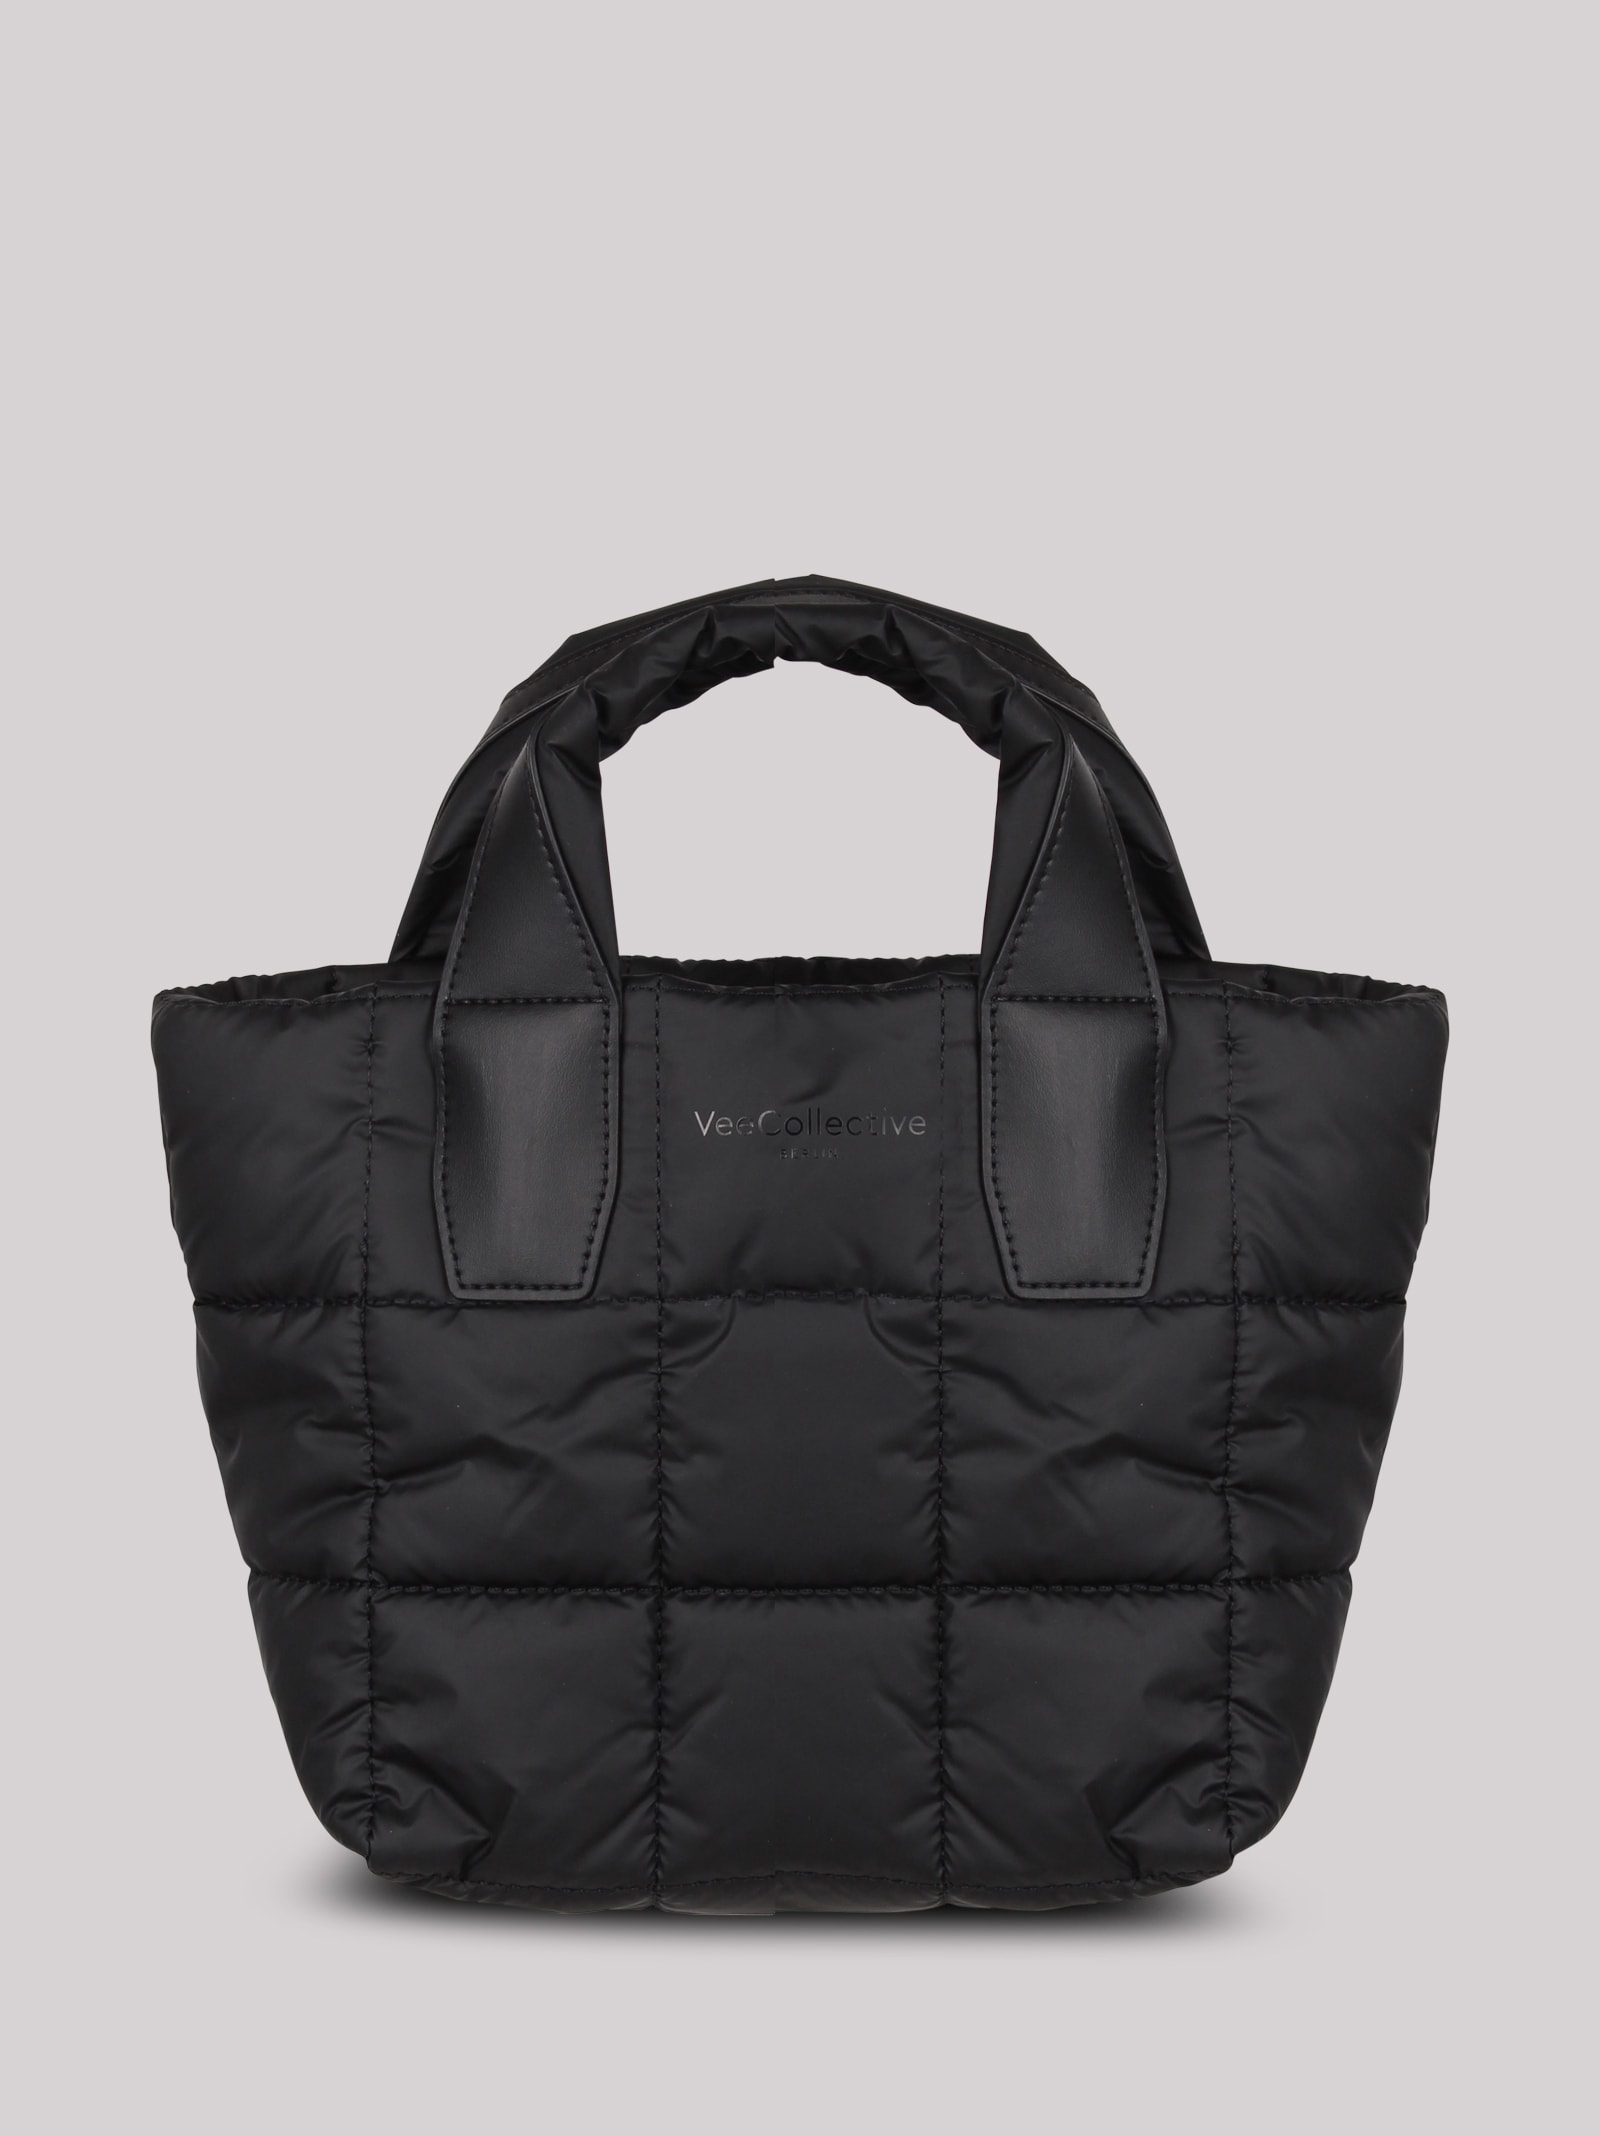 VEECOLLECTIVE VEE COLLECTIVE PADDED MINI TOTE BAG